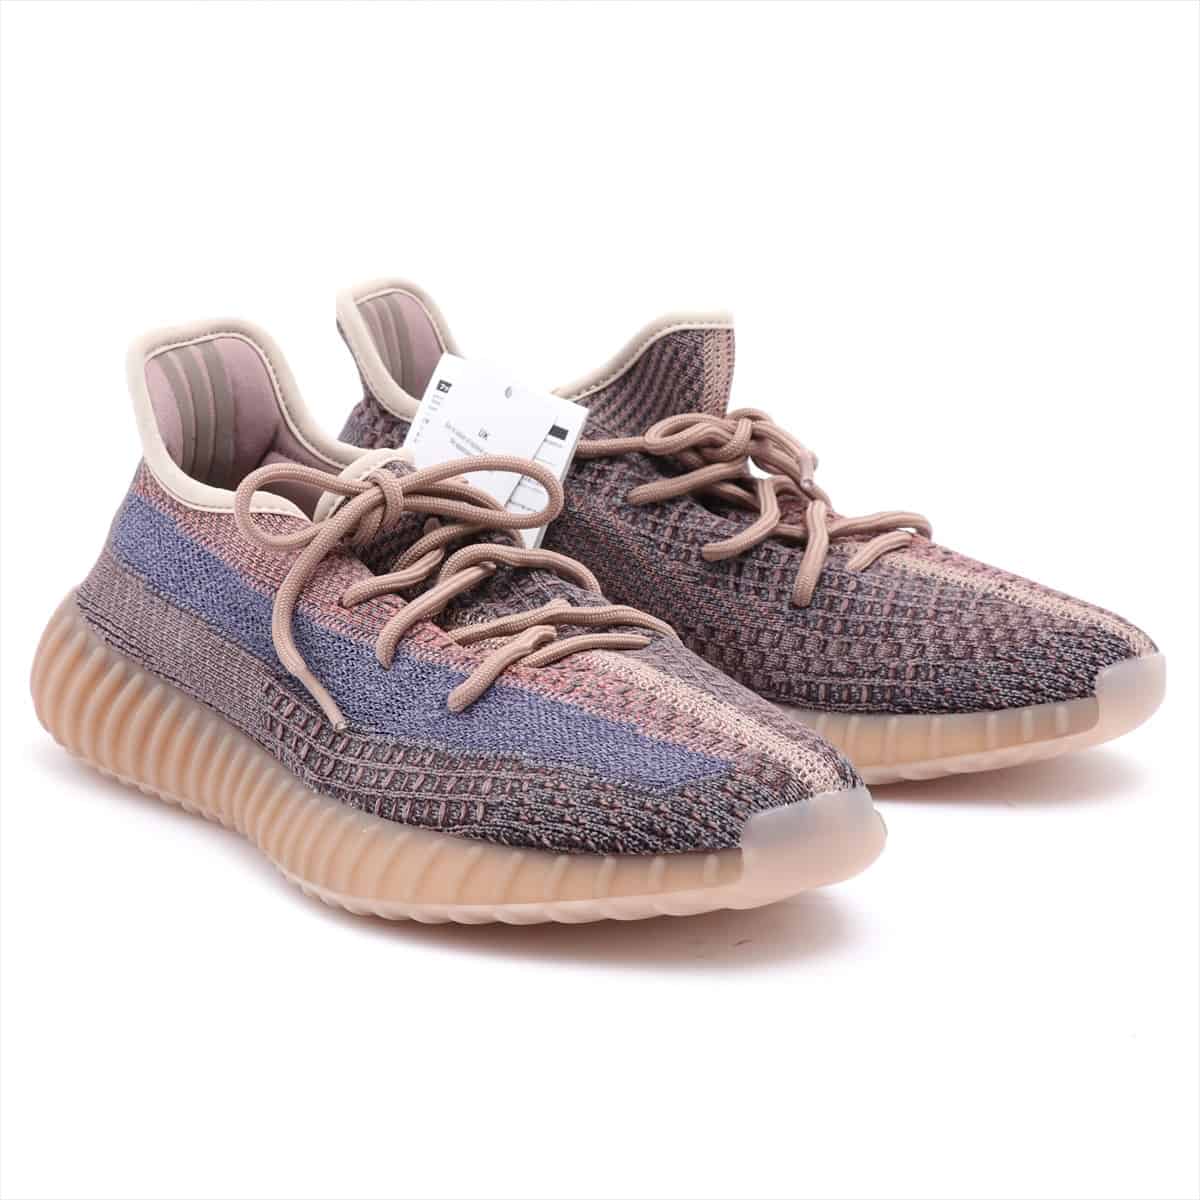 Adidas Knit Sneakers 26.5cm Men's Purple easy boost 350 V2 H02795